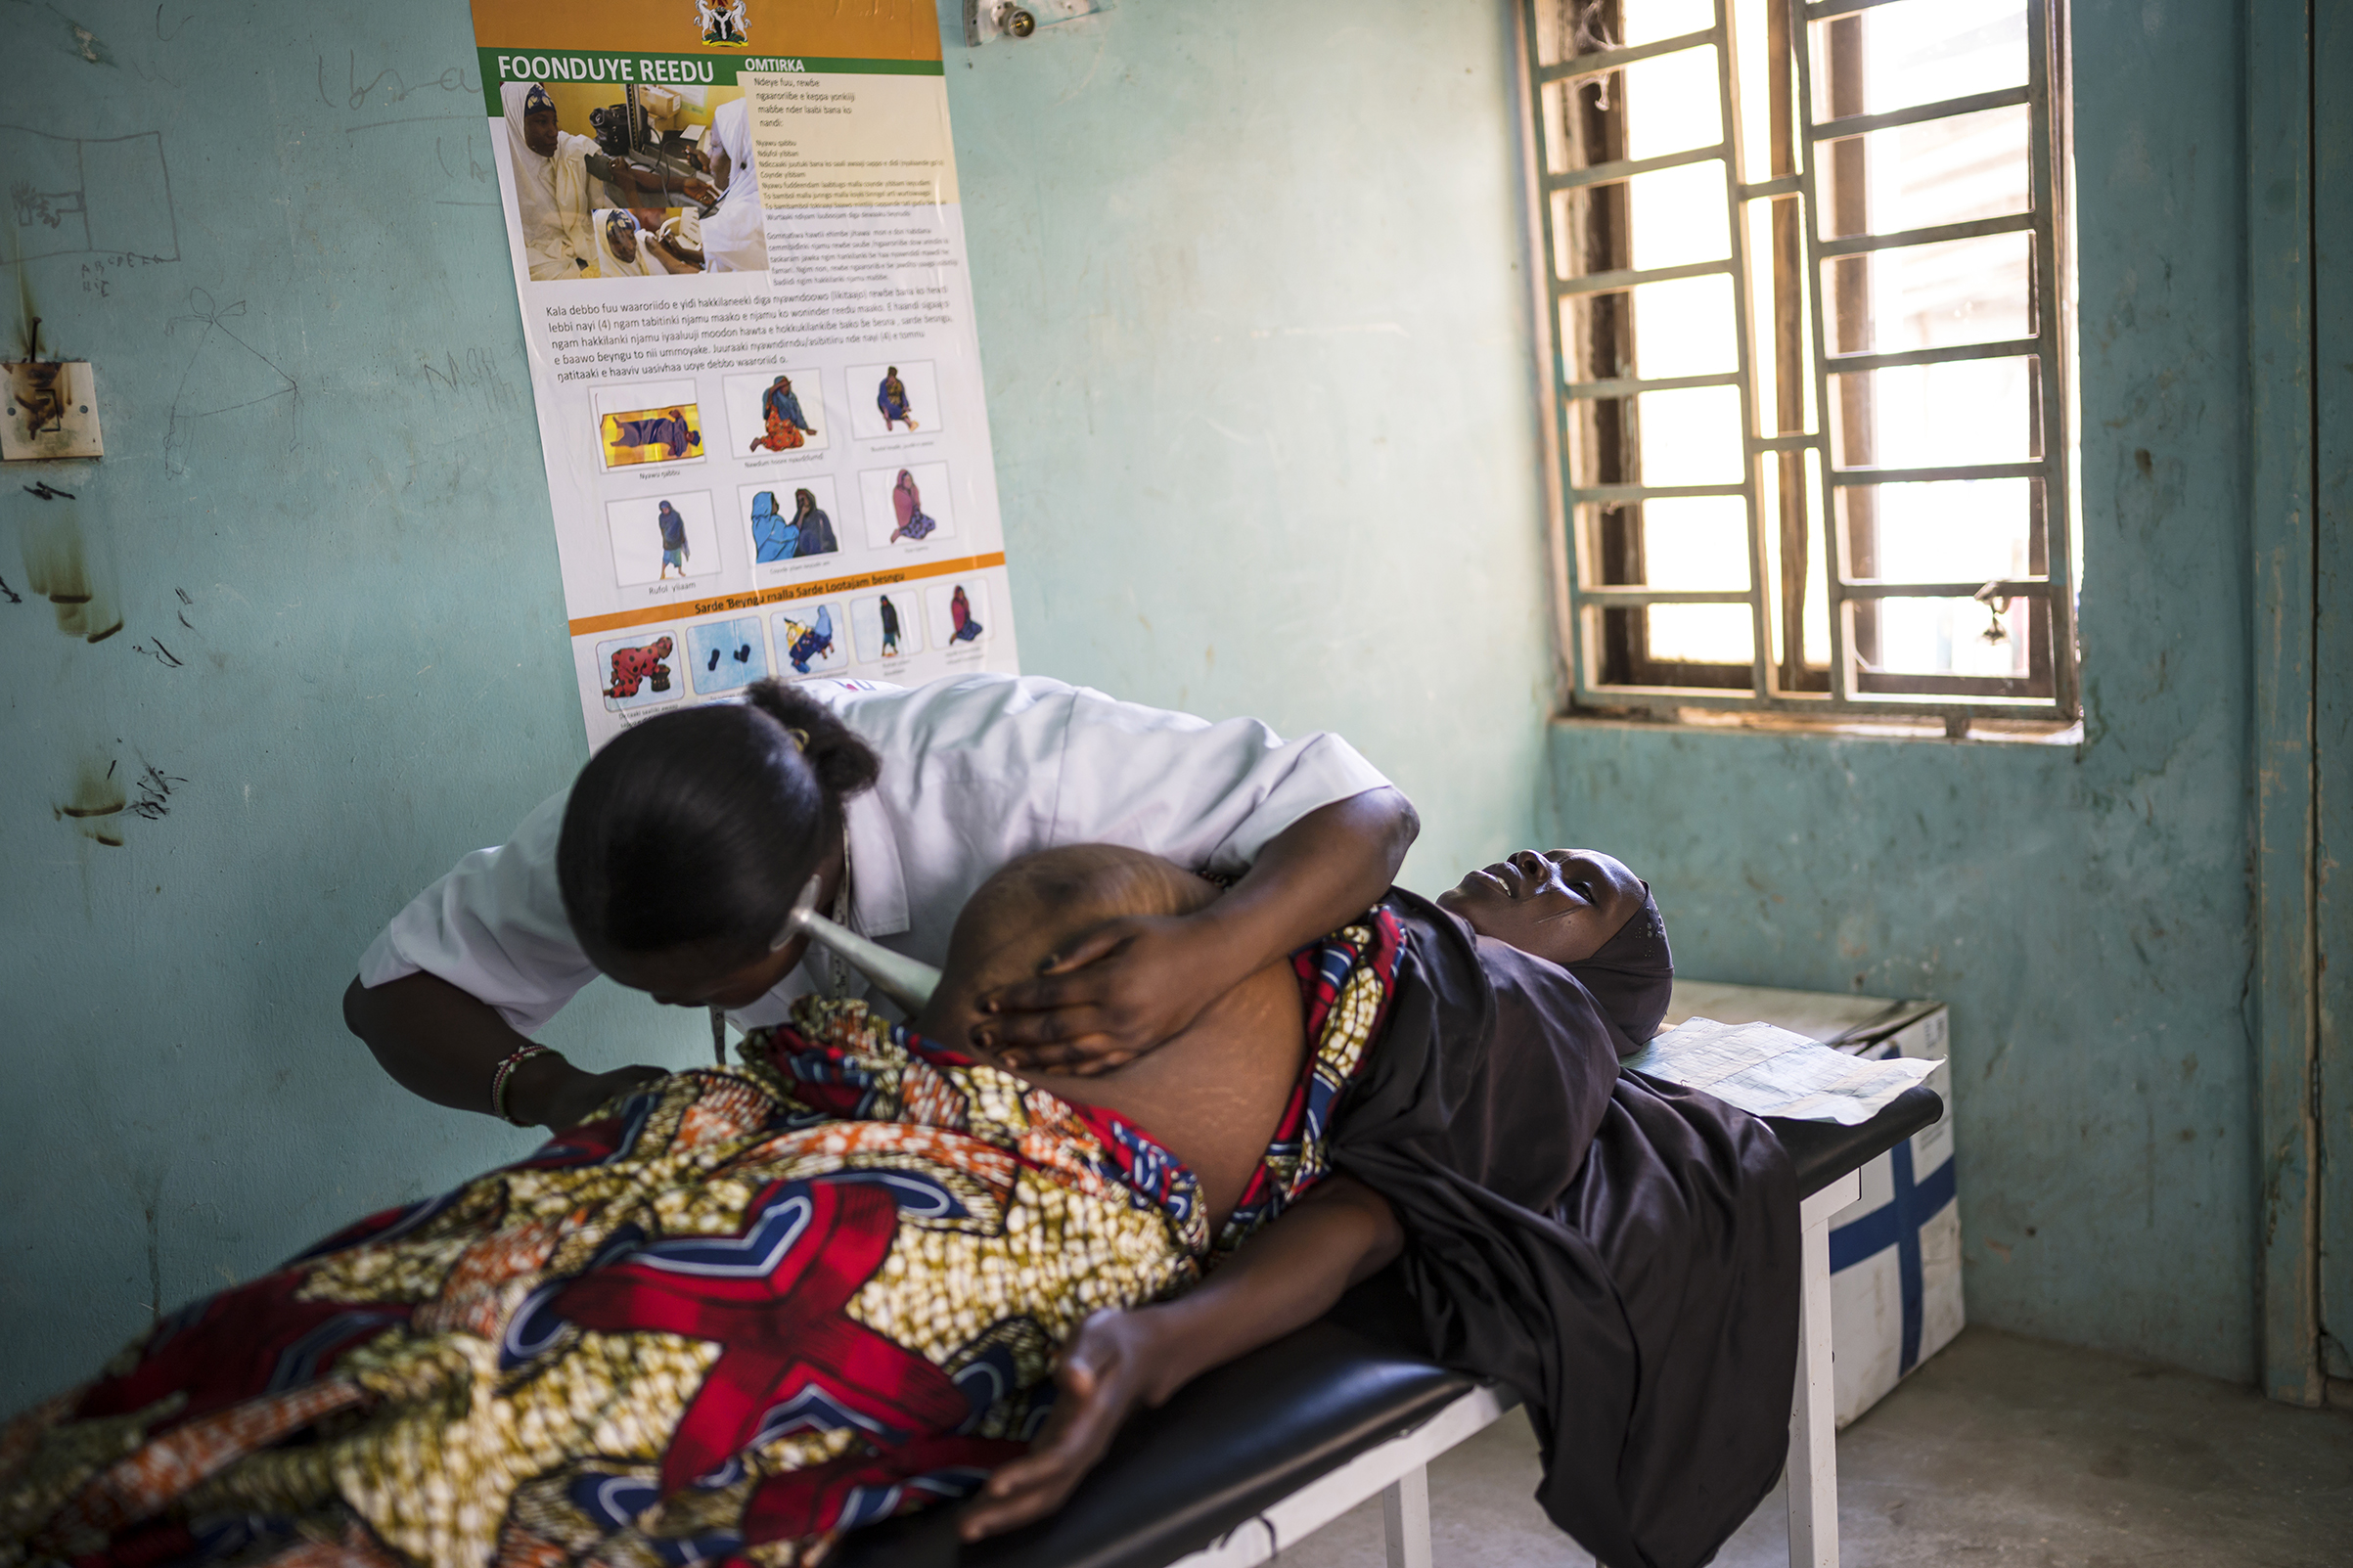 Midwife Topchin Job Goro, 28, checks Maryam Mohammed, 30, who is 38 weeks pregnant with her 8th child in the Ngala clinic (Lynsey Addario for TIME)